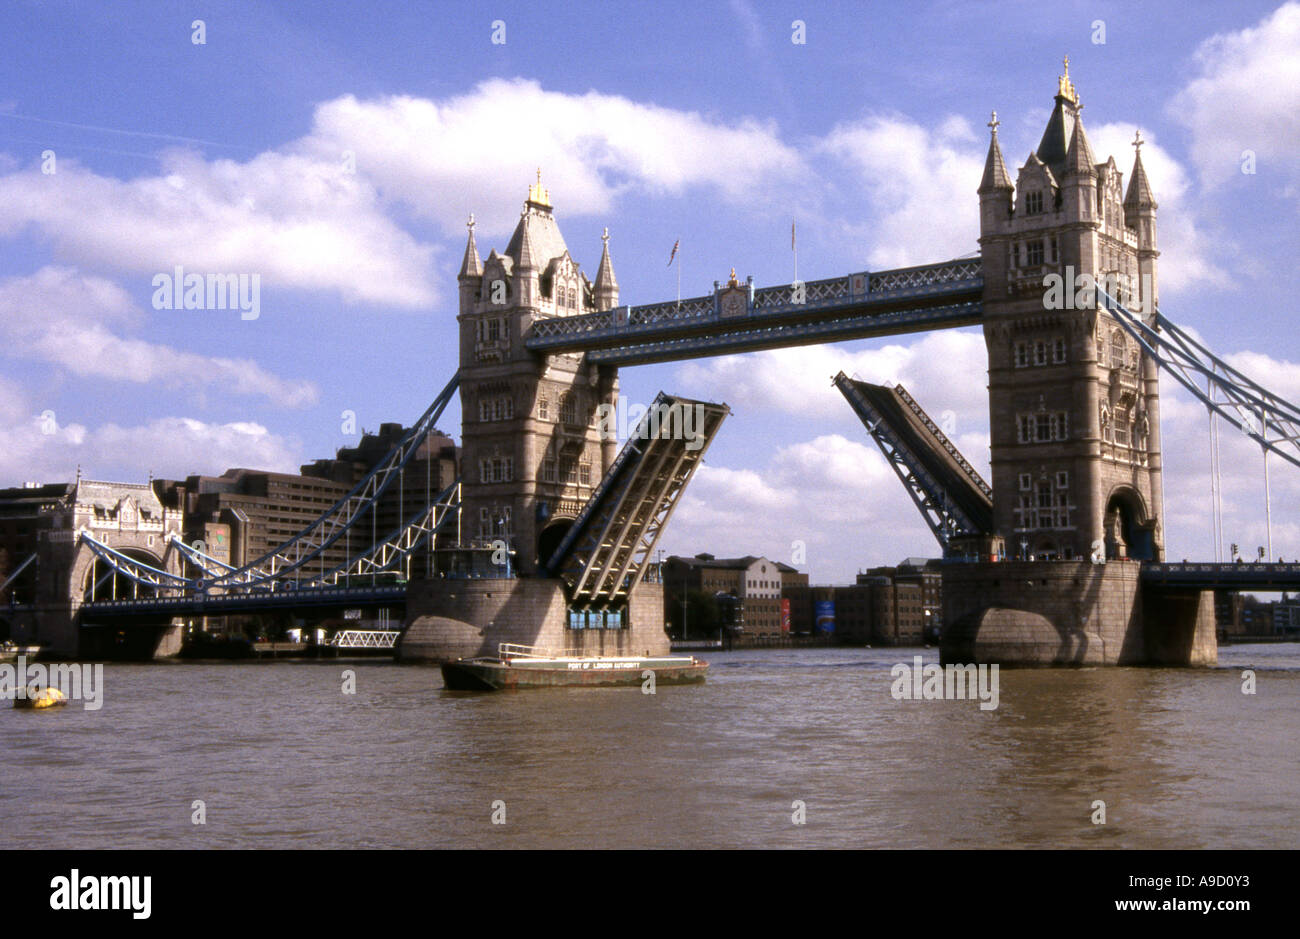 View Tower Bridge the middle splits & lifts up to allow tall ships to pass  through River Thames London England UK Europe Stock Photo - Alamy